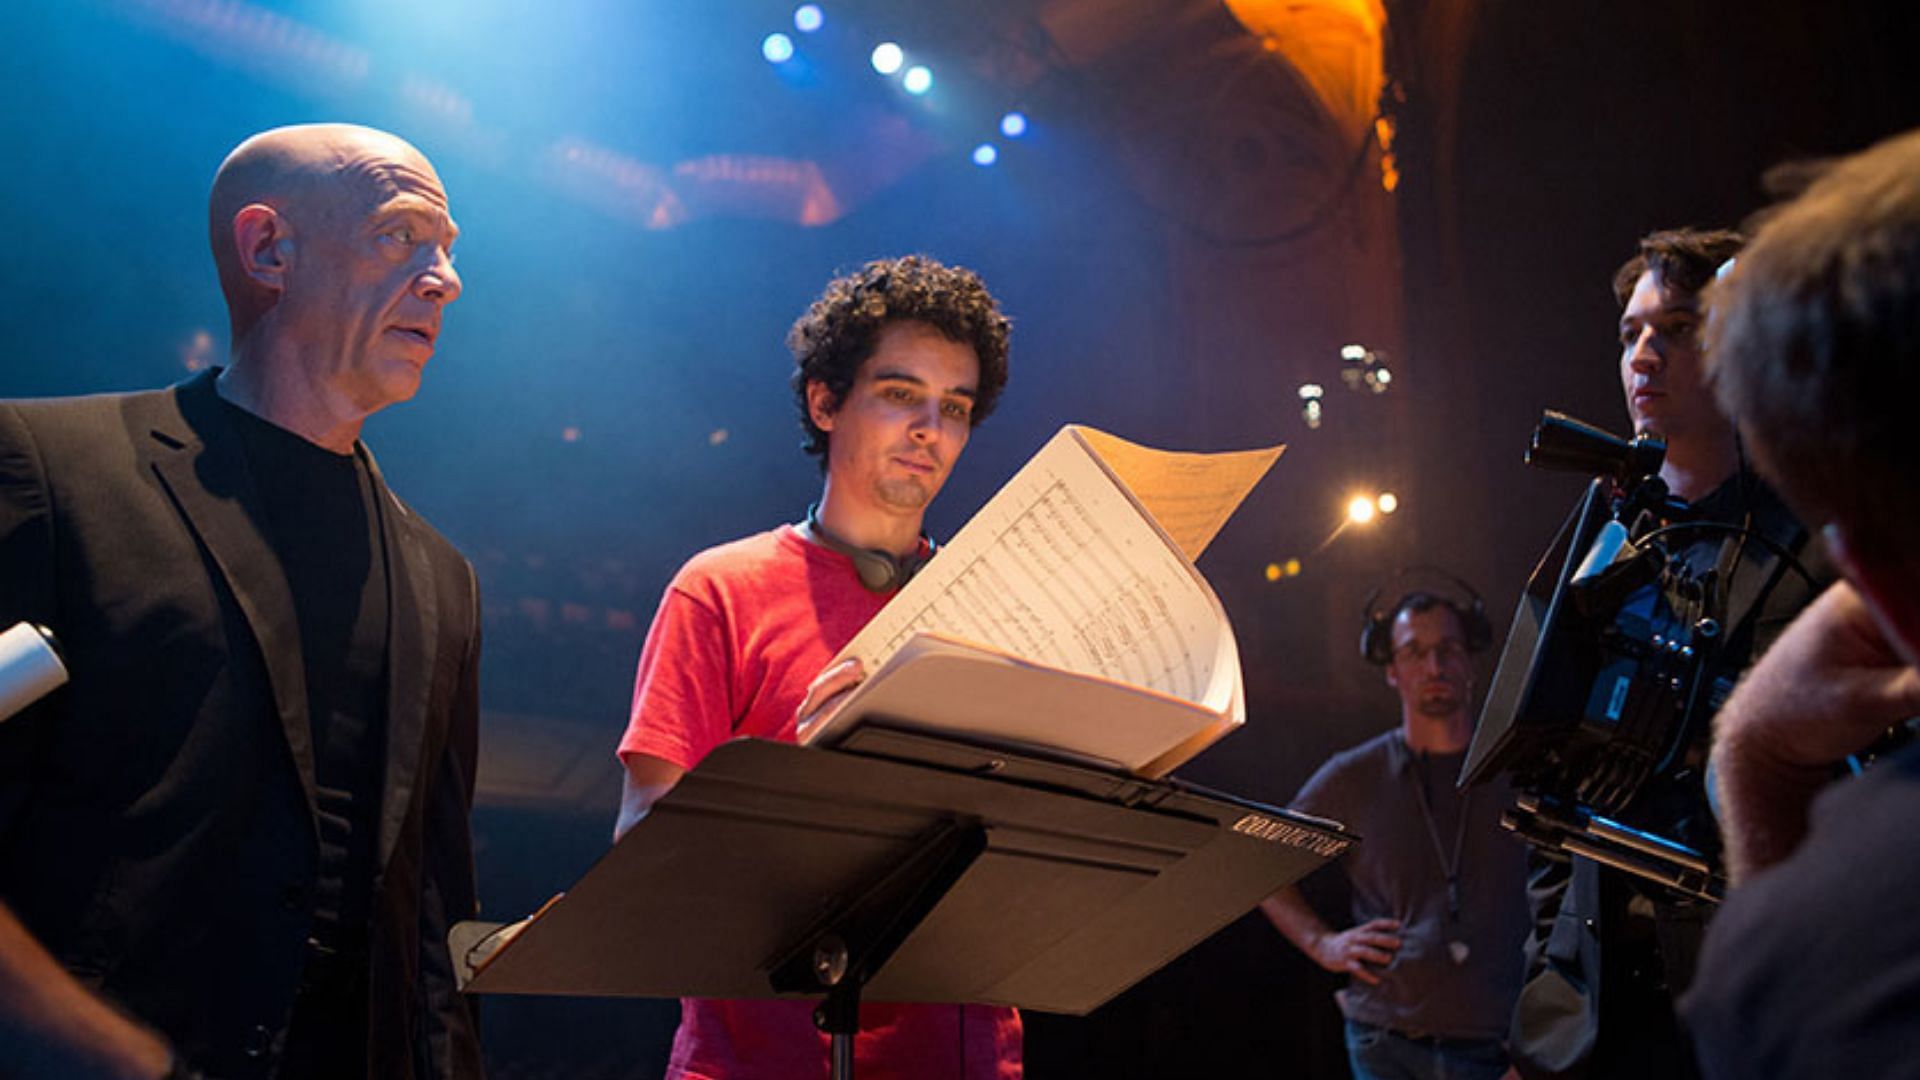 From the making of Whiplash (Image via sonyclassics.com)